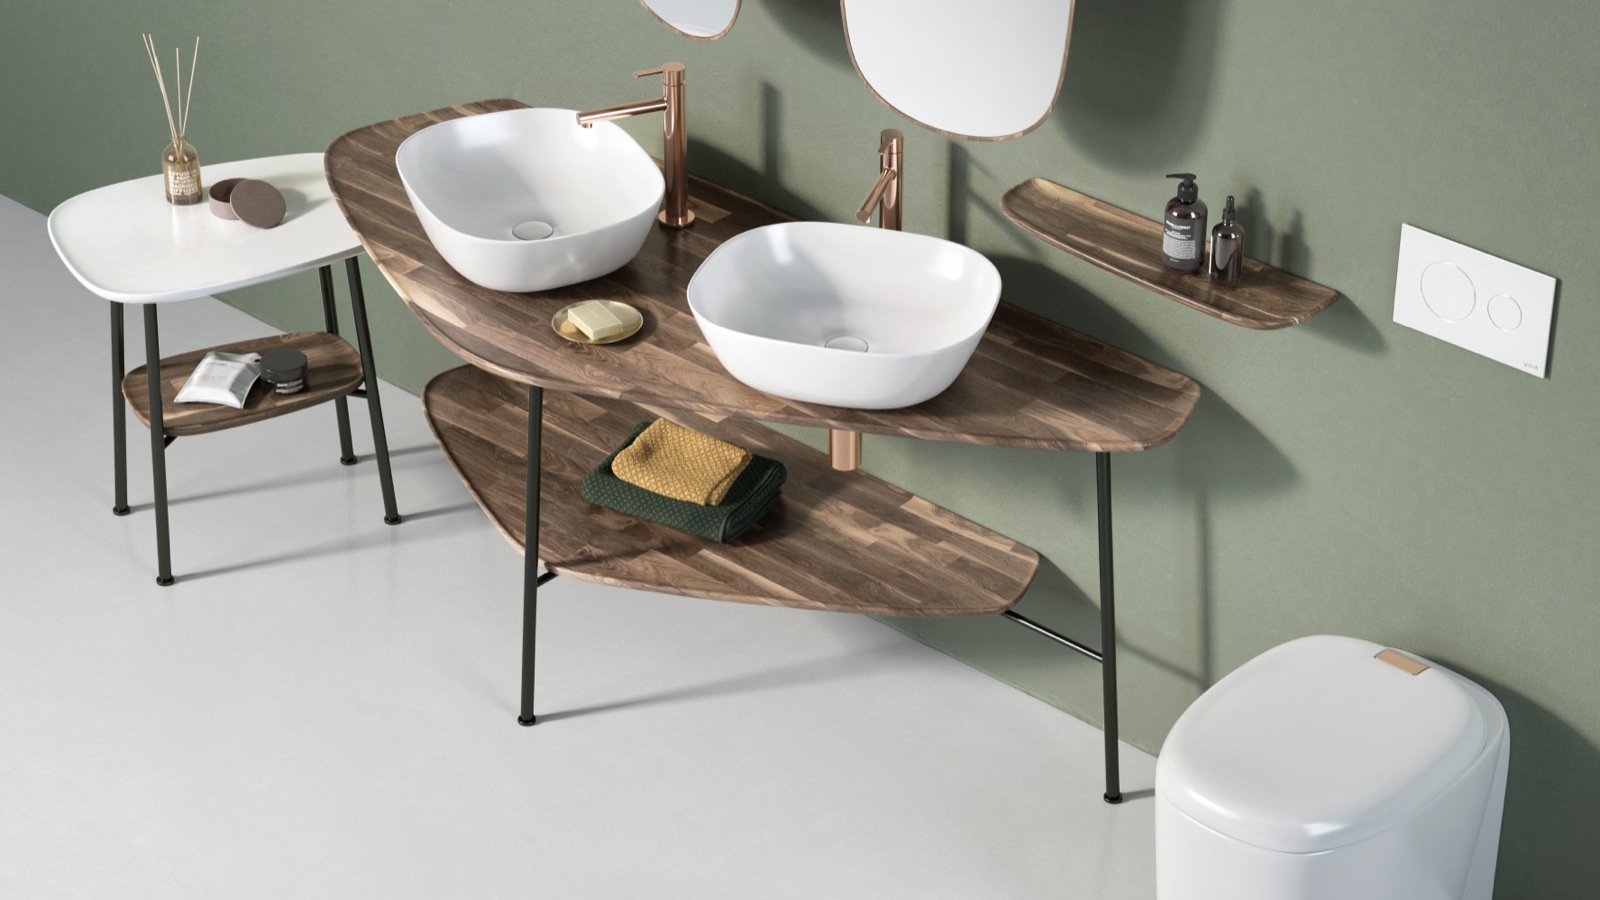 Bathroom trends for 2019 6